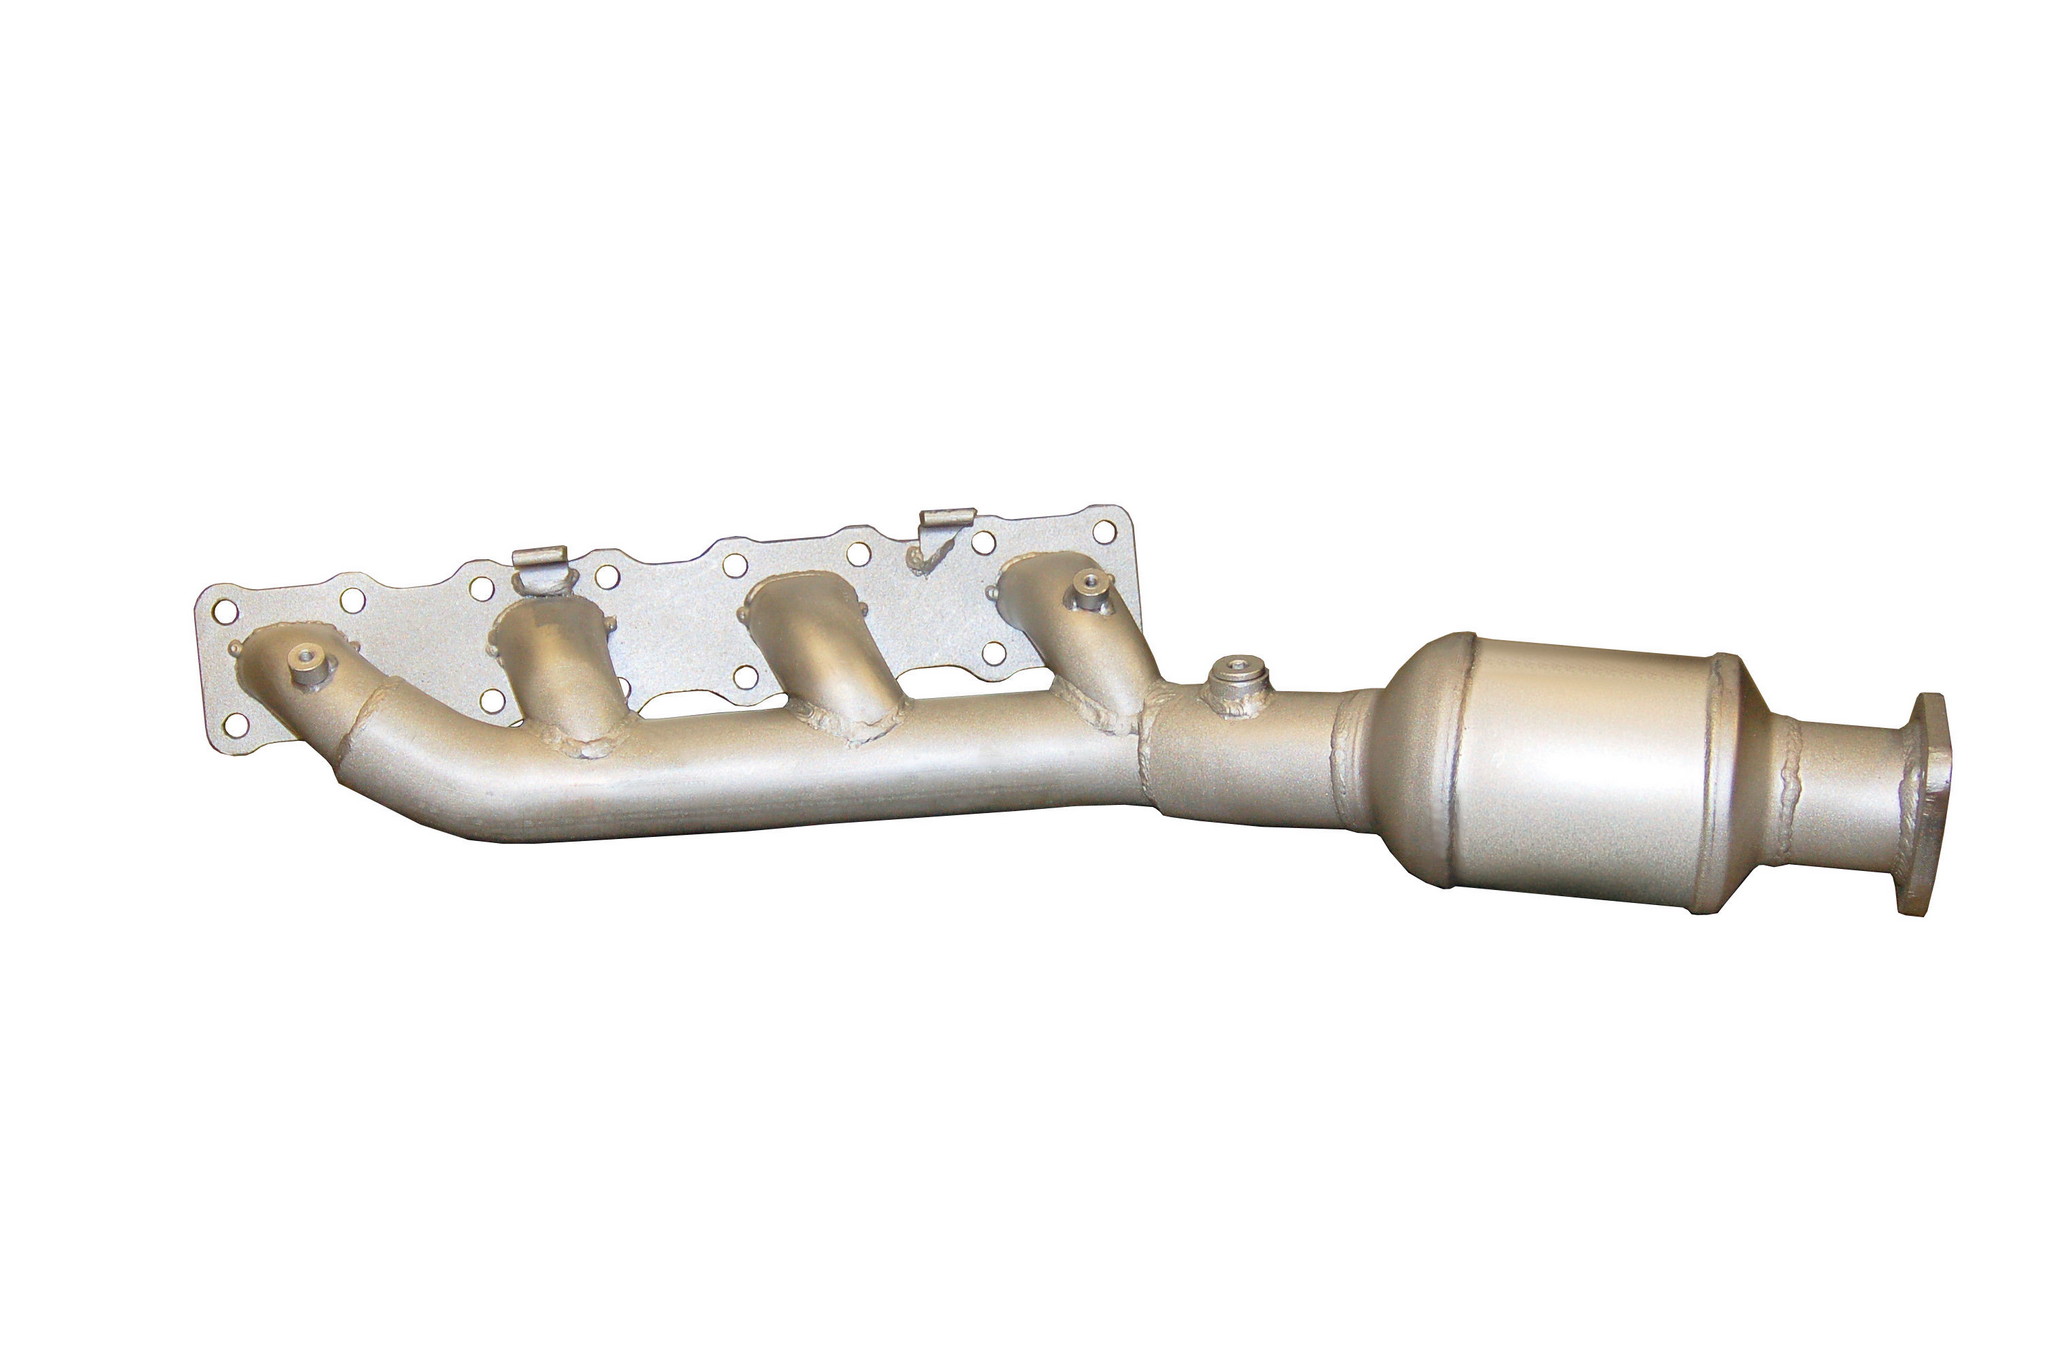 2008 Nissan Titan Exhaust Manifold with Integrated Catalytic Converter